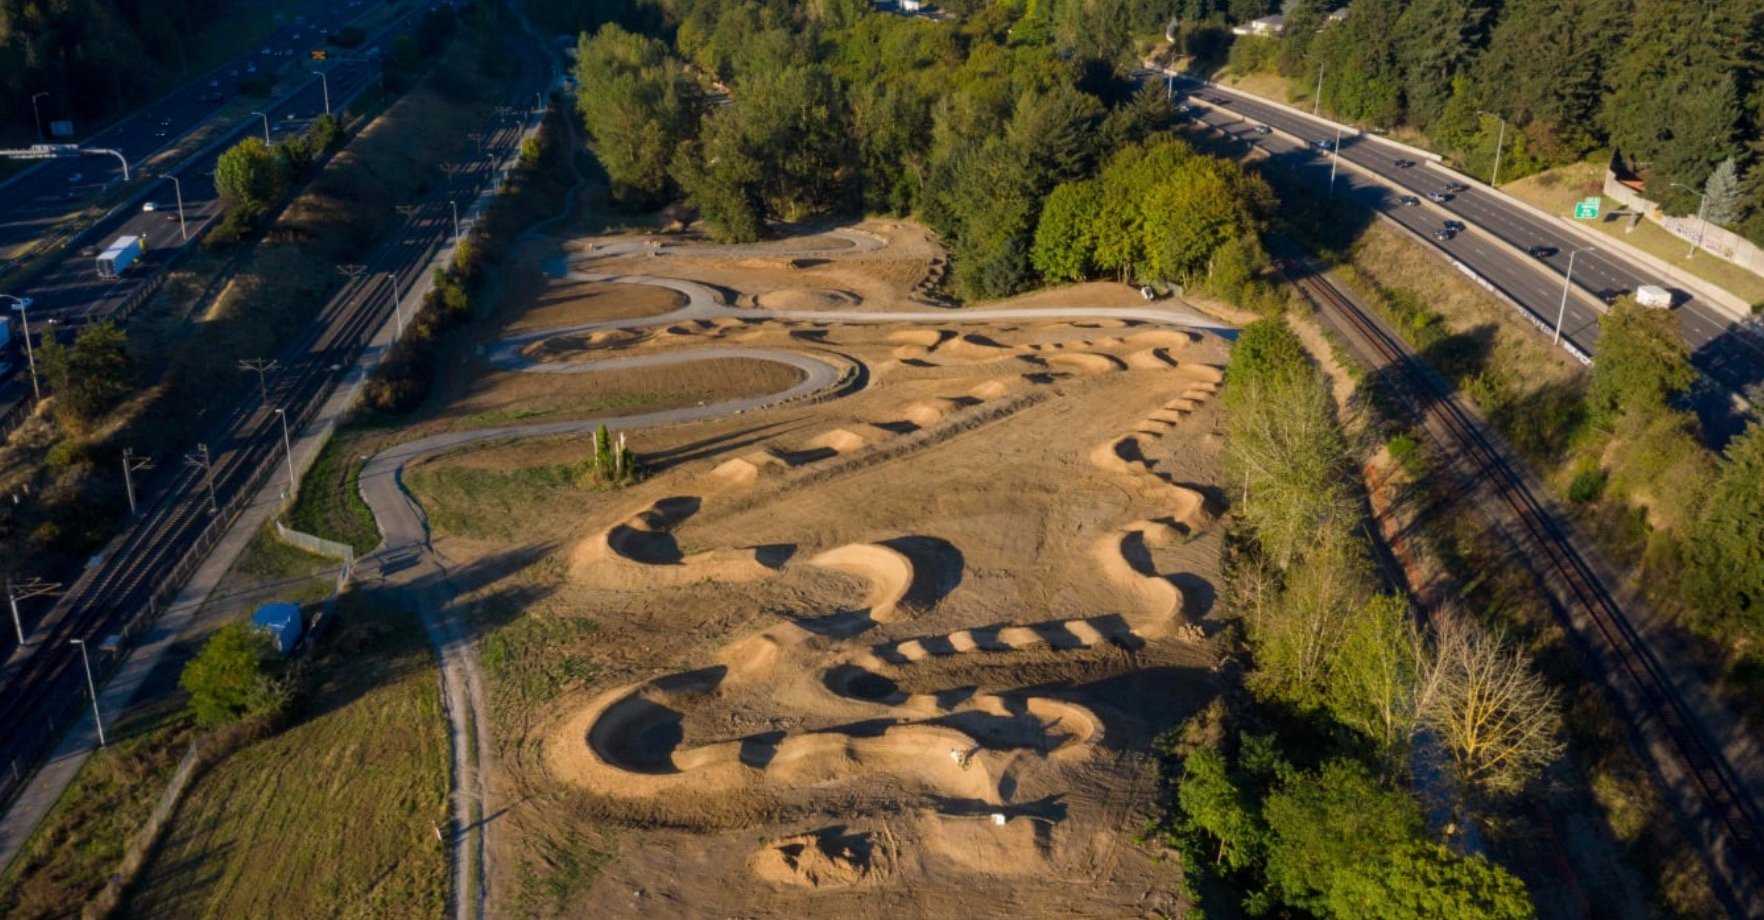 Here’s the amazing new pump track coming to Gateway Green BikePortland